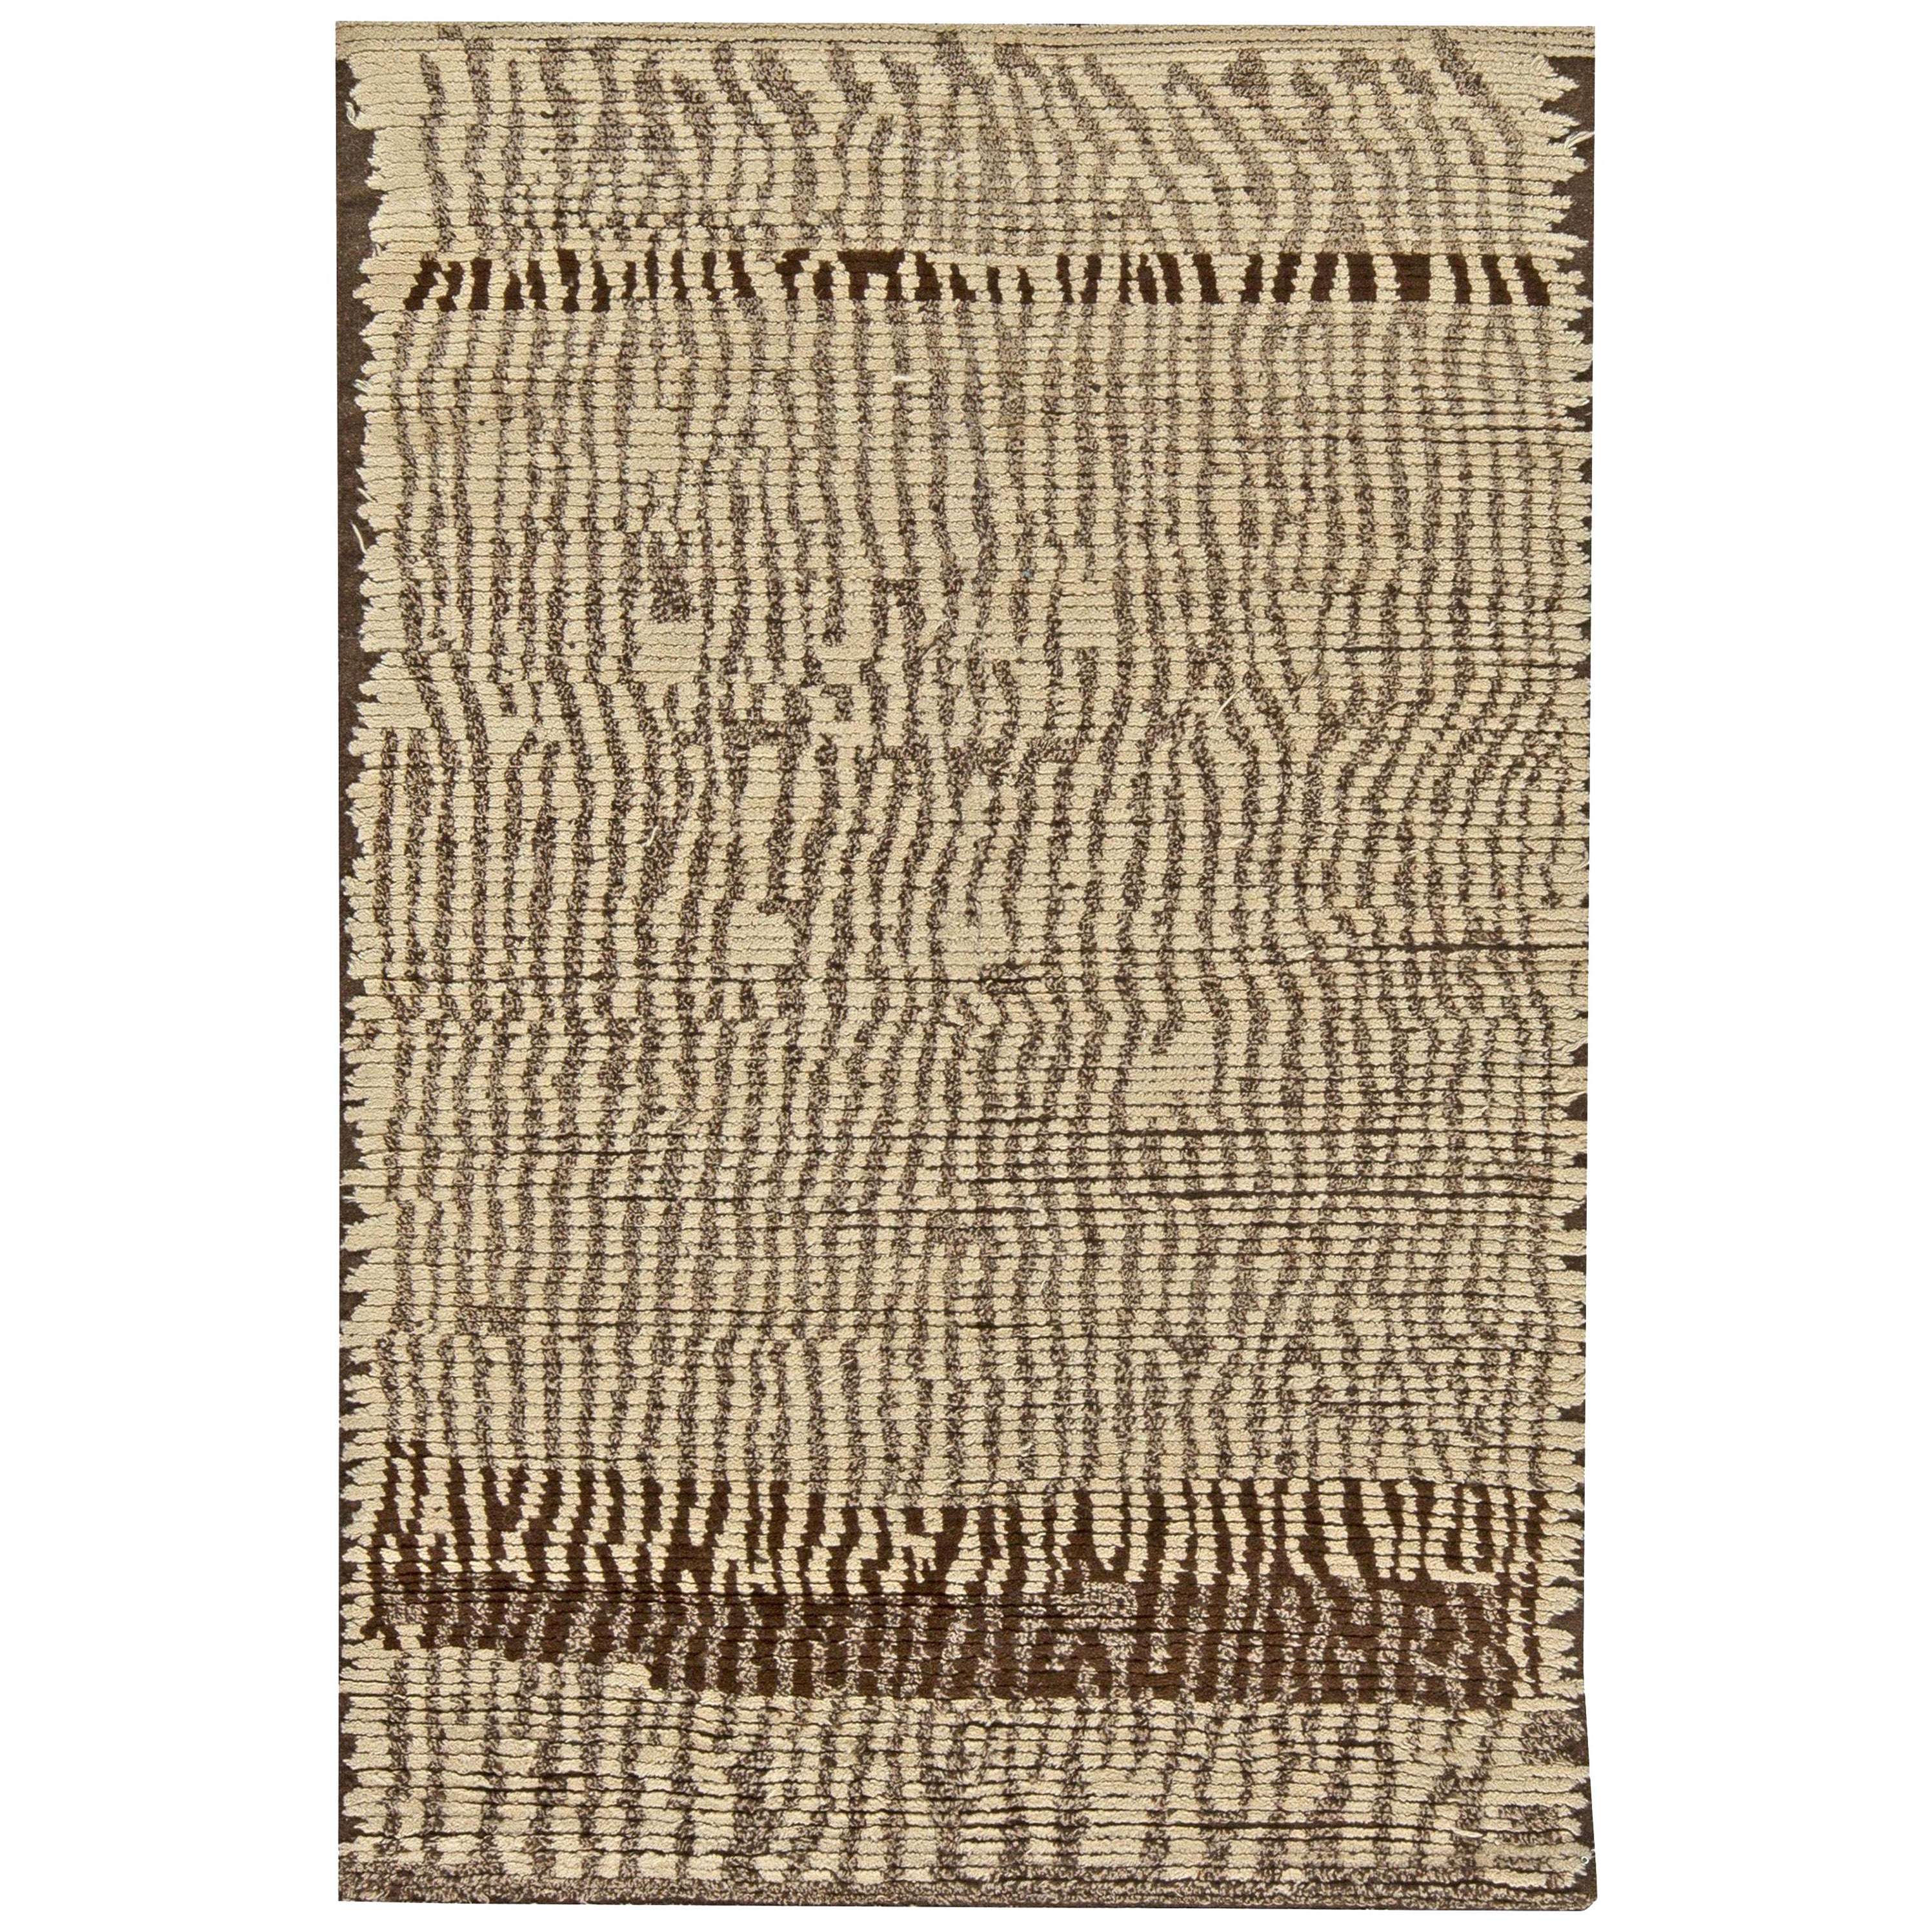 Small Moroccan Tribal Style Area Rug by Doris Leslie Blau For Sale